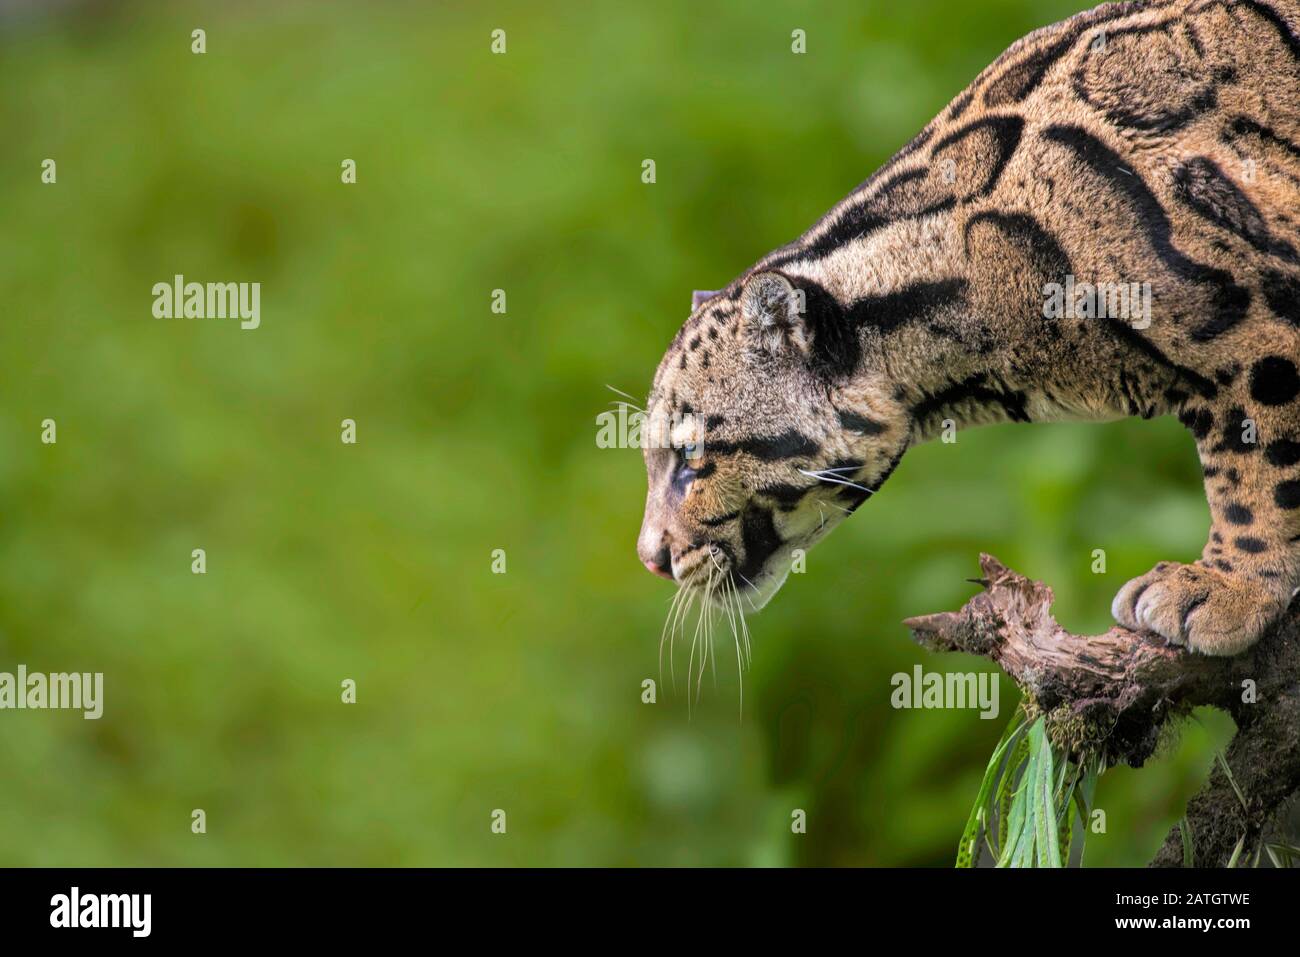 Clouded Leopard, Neofelis nebulosa, Himalayan foothills, India. listed as Vulnerable on the IUCN Red List. Stock Photo